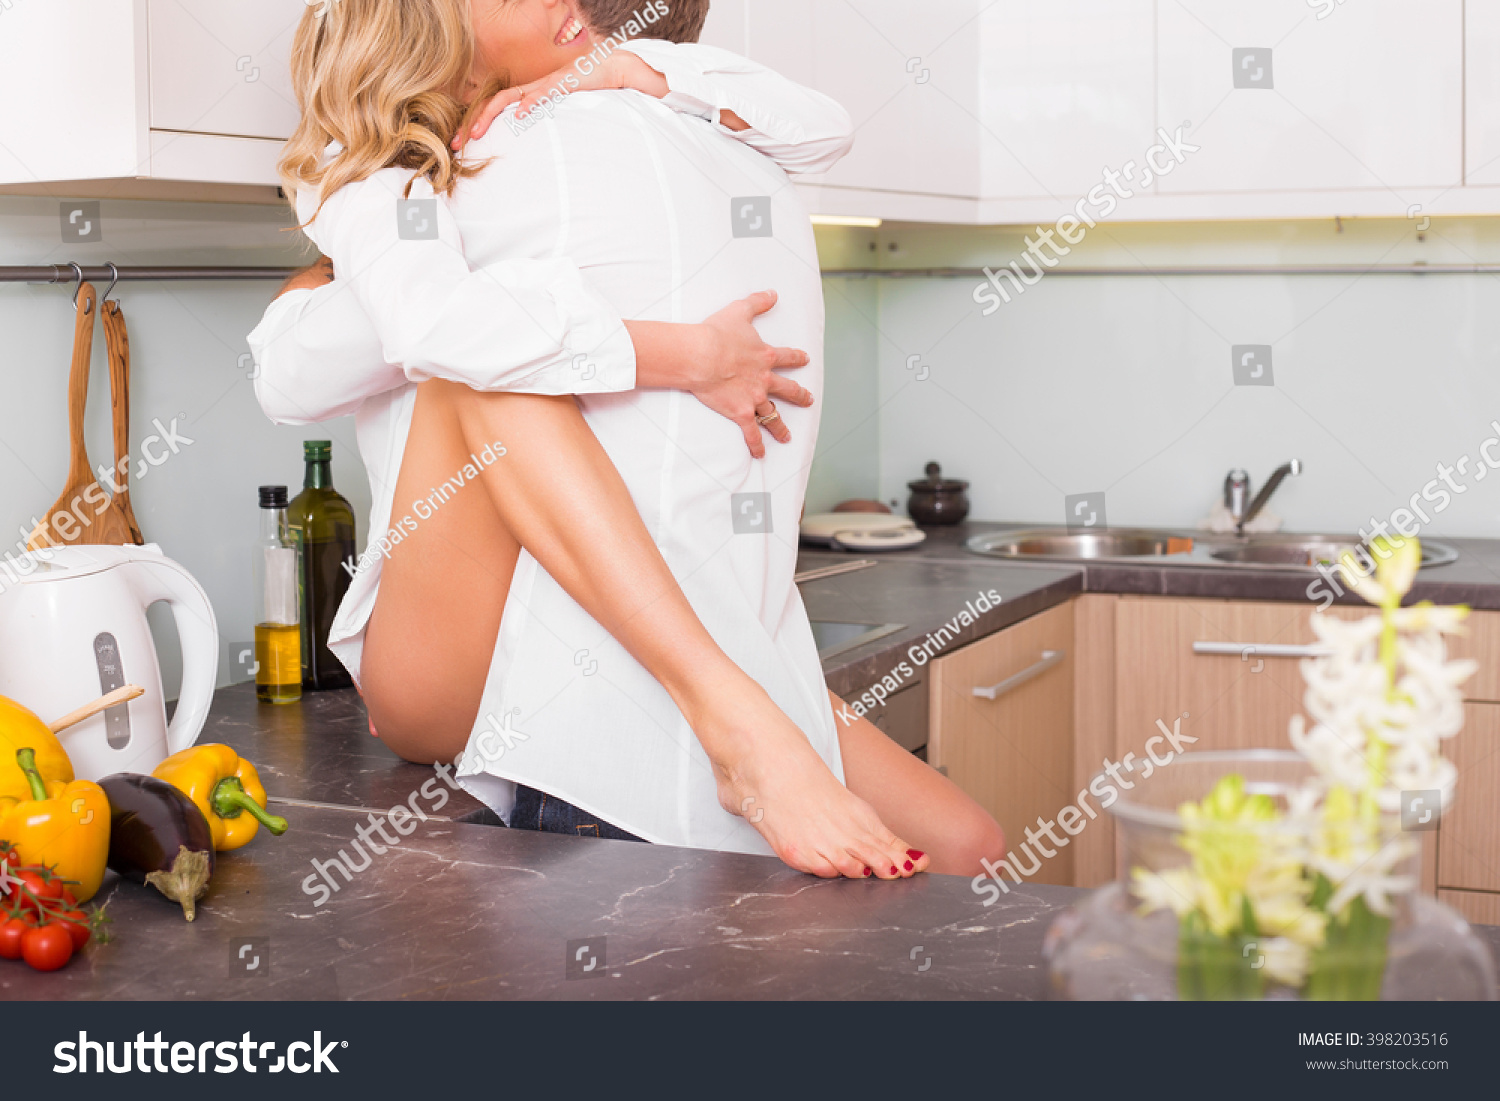 Sex On The Counter 93